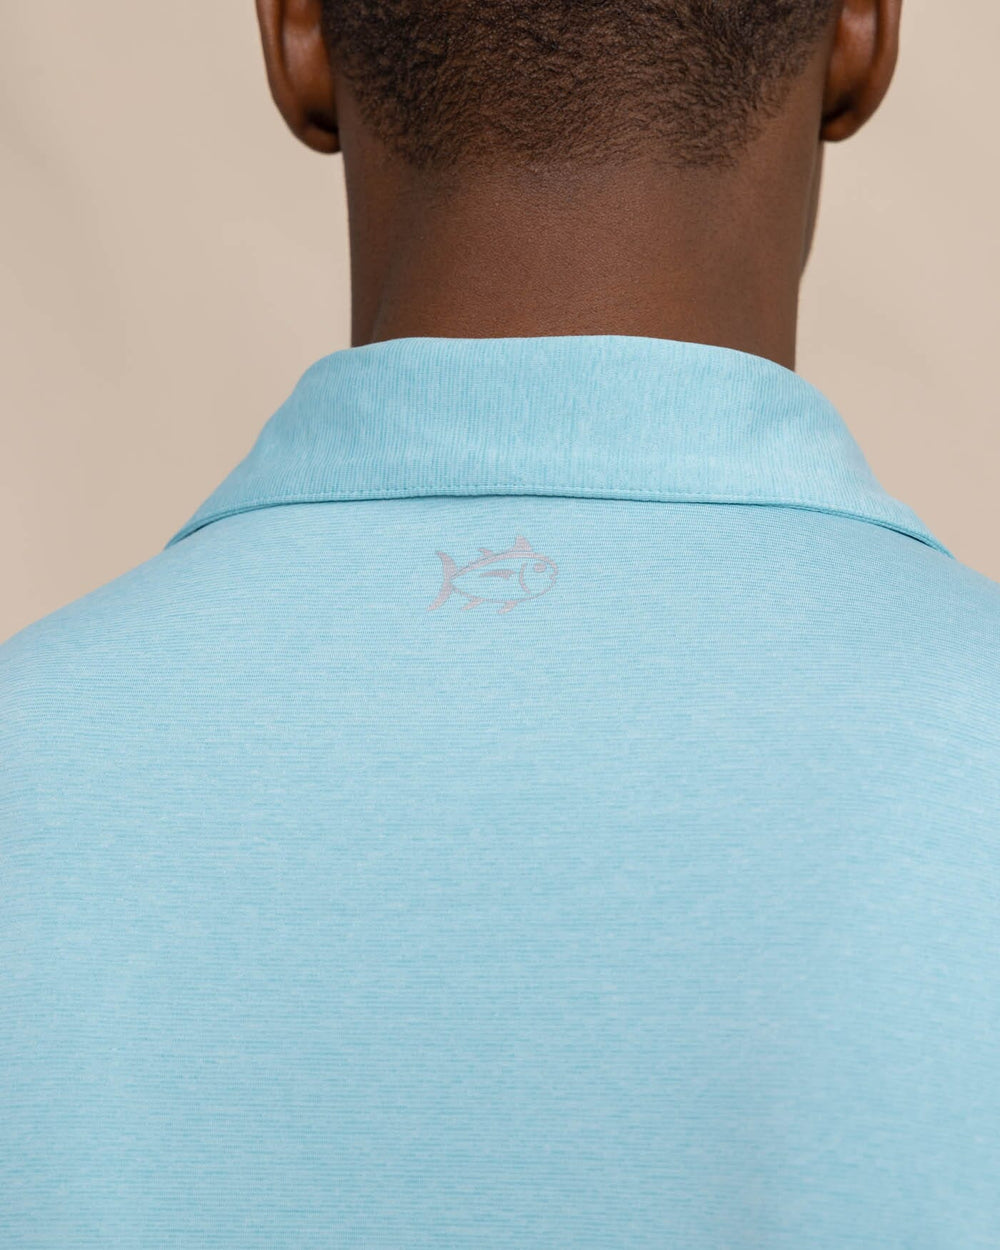 The detail view of the Southern Tide brrr eeze Heather Performance Polo Shirt by Southern Tide - Heather Marine Blue